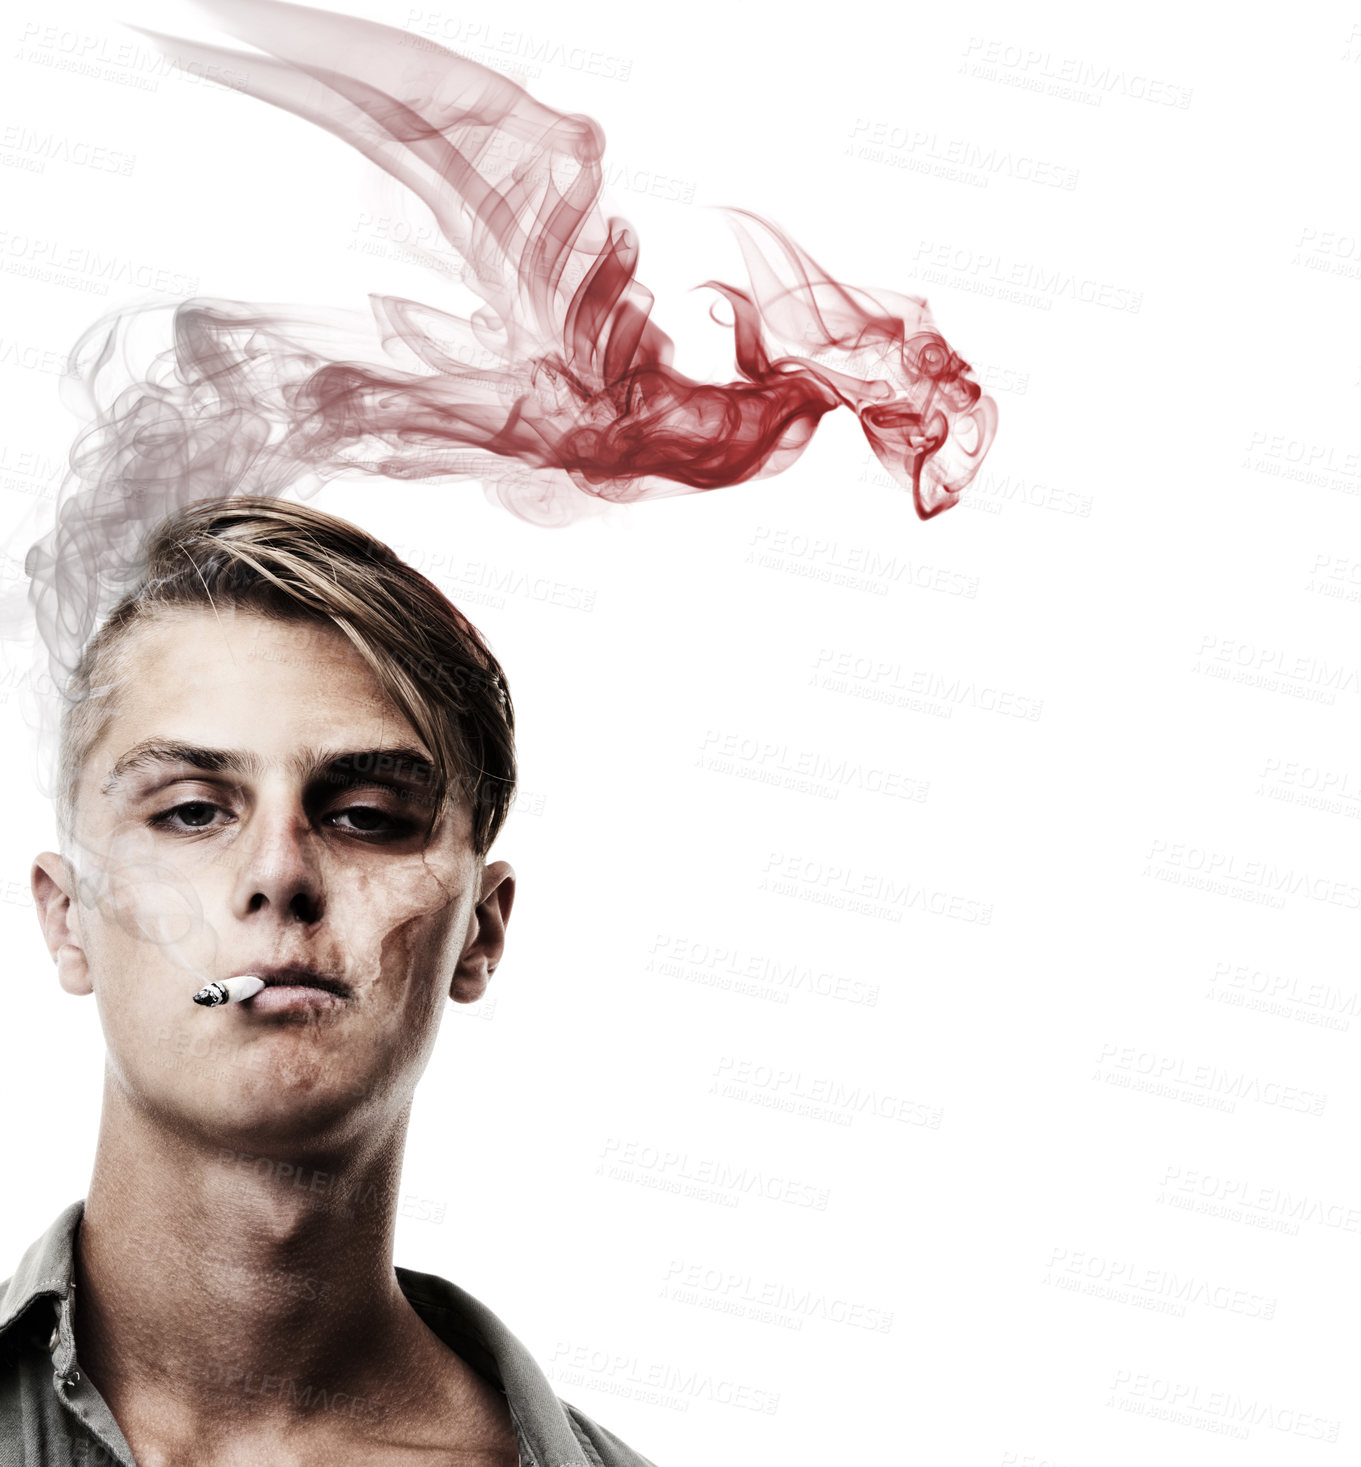 Buy stock photo Smoking graphic, portrait and a man on a white background to show cigarette danger. Bad, unhealthy and a guy or person with an illustration for the effect, addiction or habit of tobacco on health